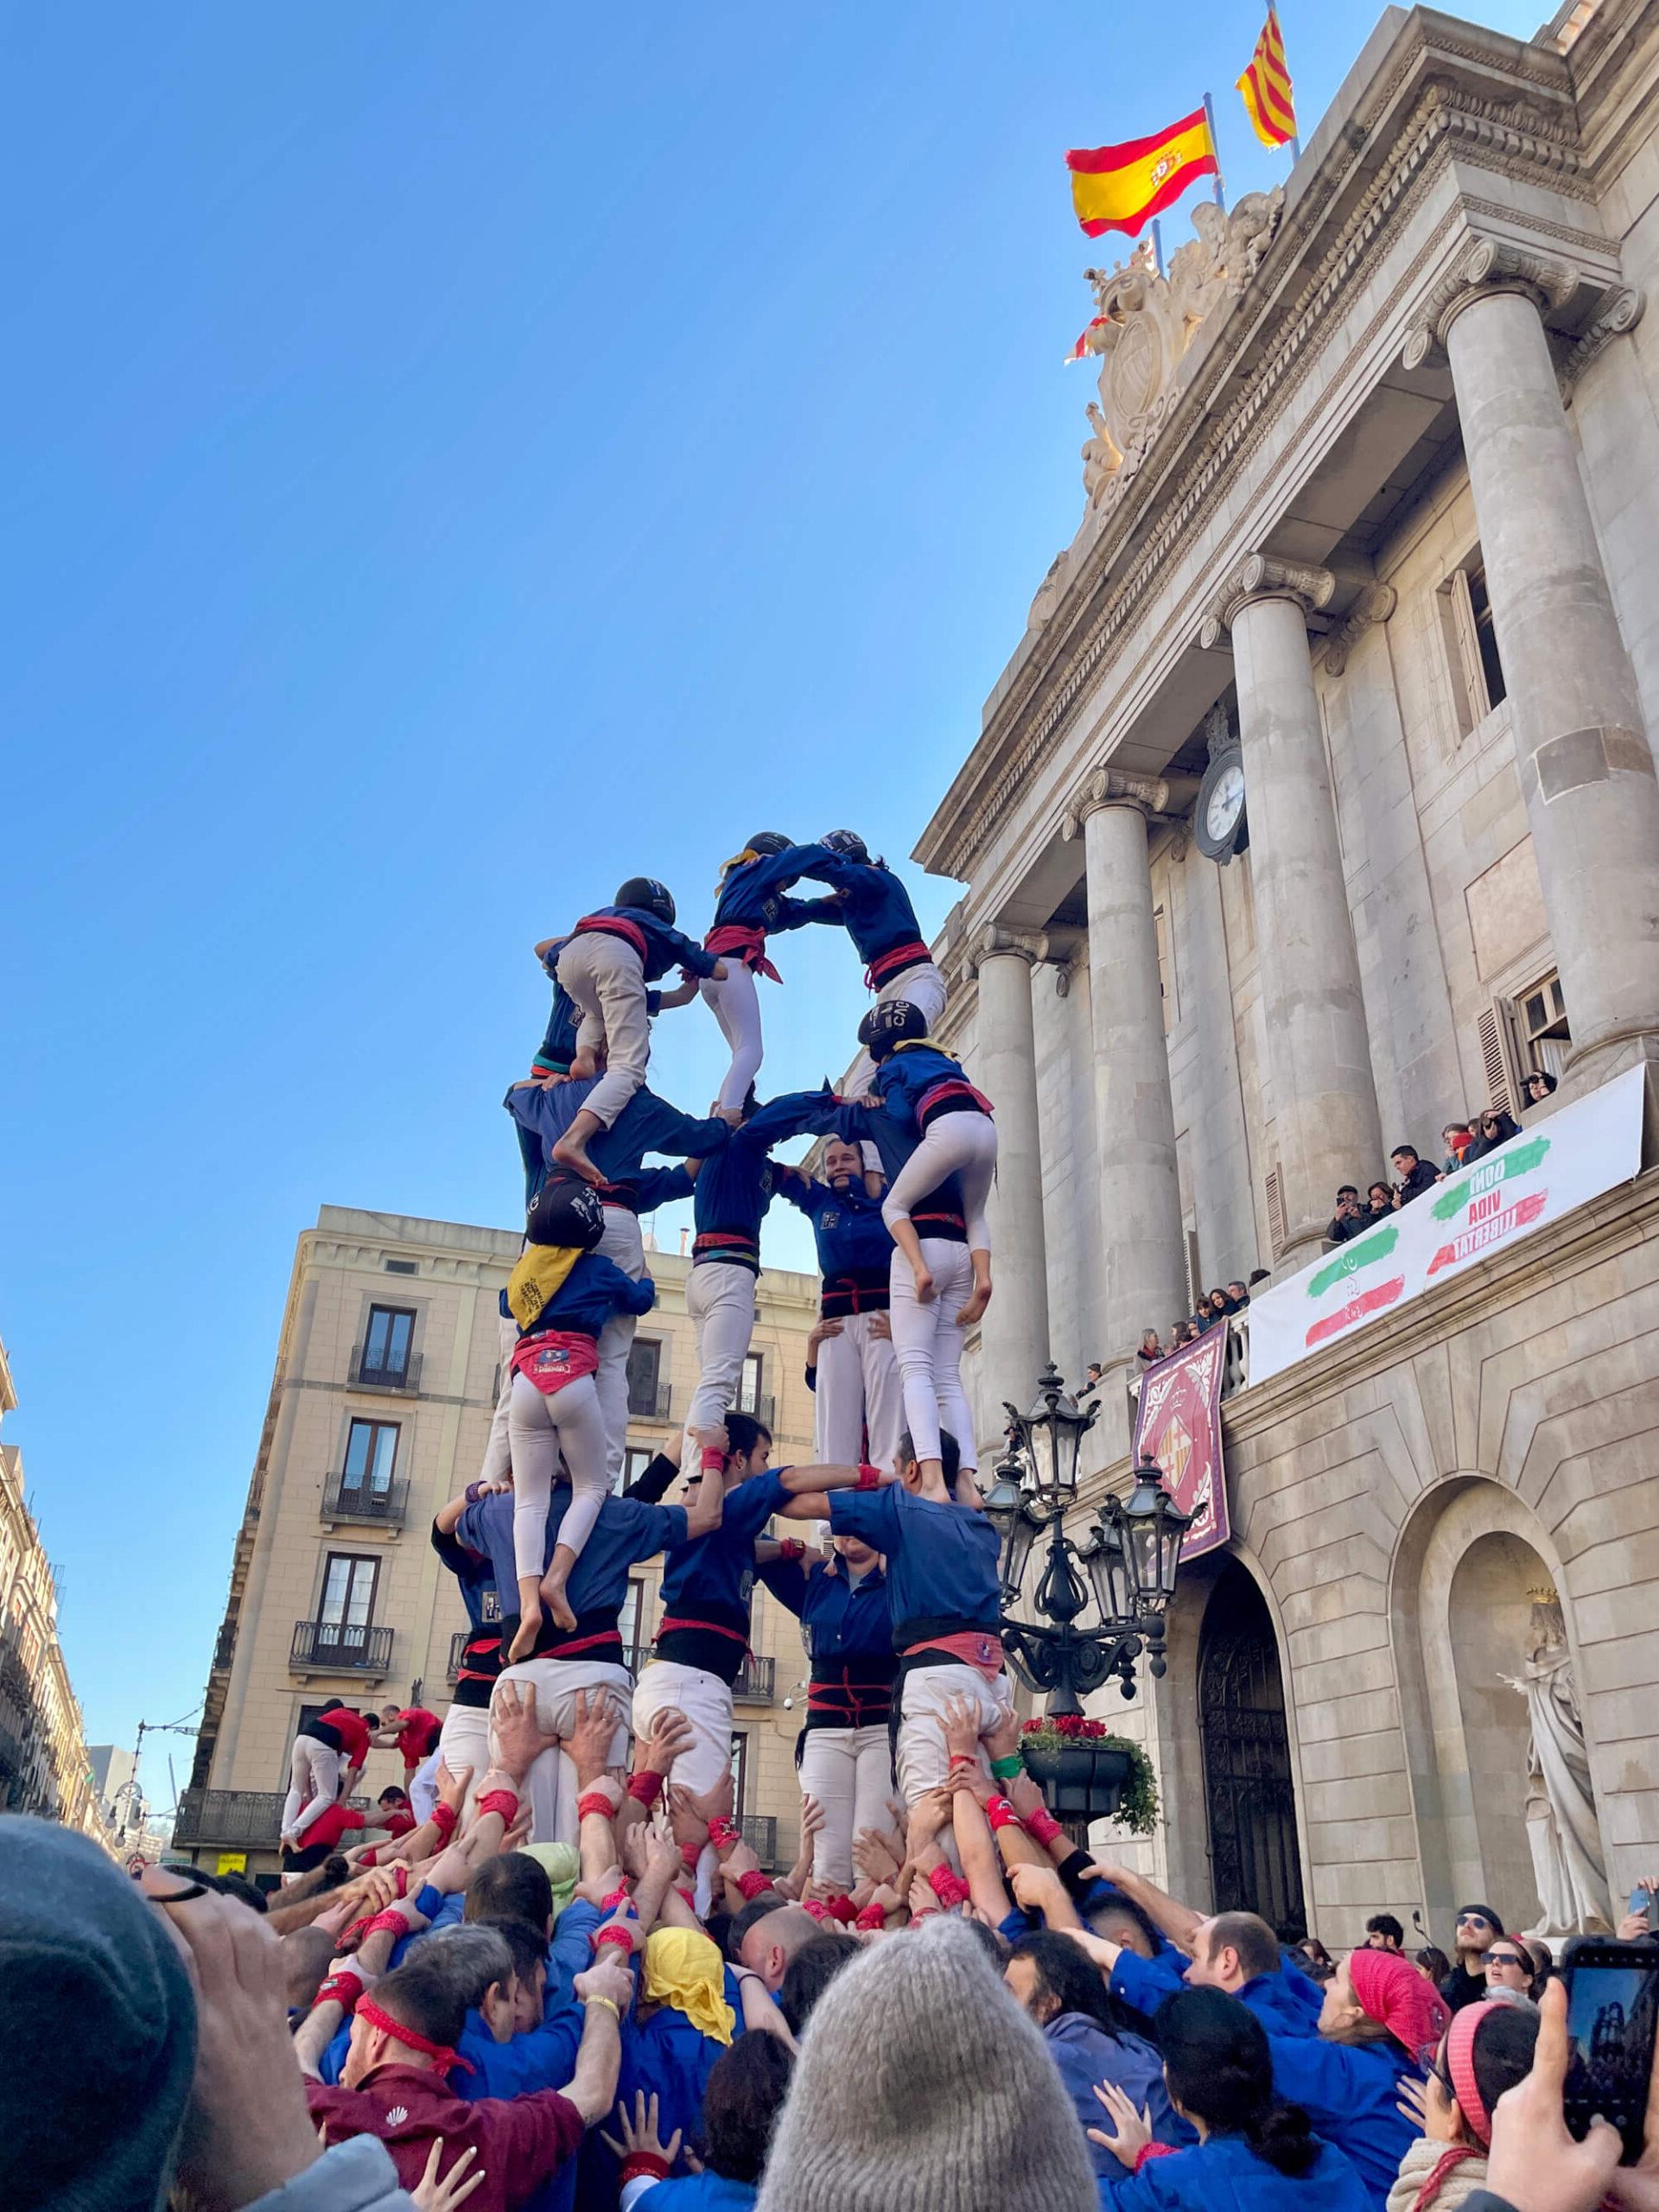 A human tower is formed by a group of people, standing in front of a historic building with columns. 在楼顶可以看到旗帜. 塔底很宽, 到达顶部时逐渐变窄, 有几个层次的参与者. 围观者聚集在周围.